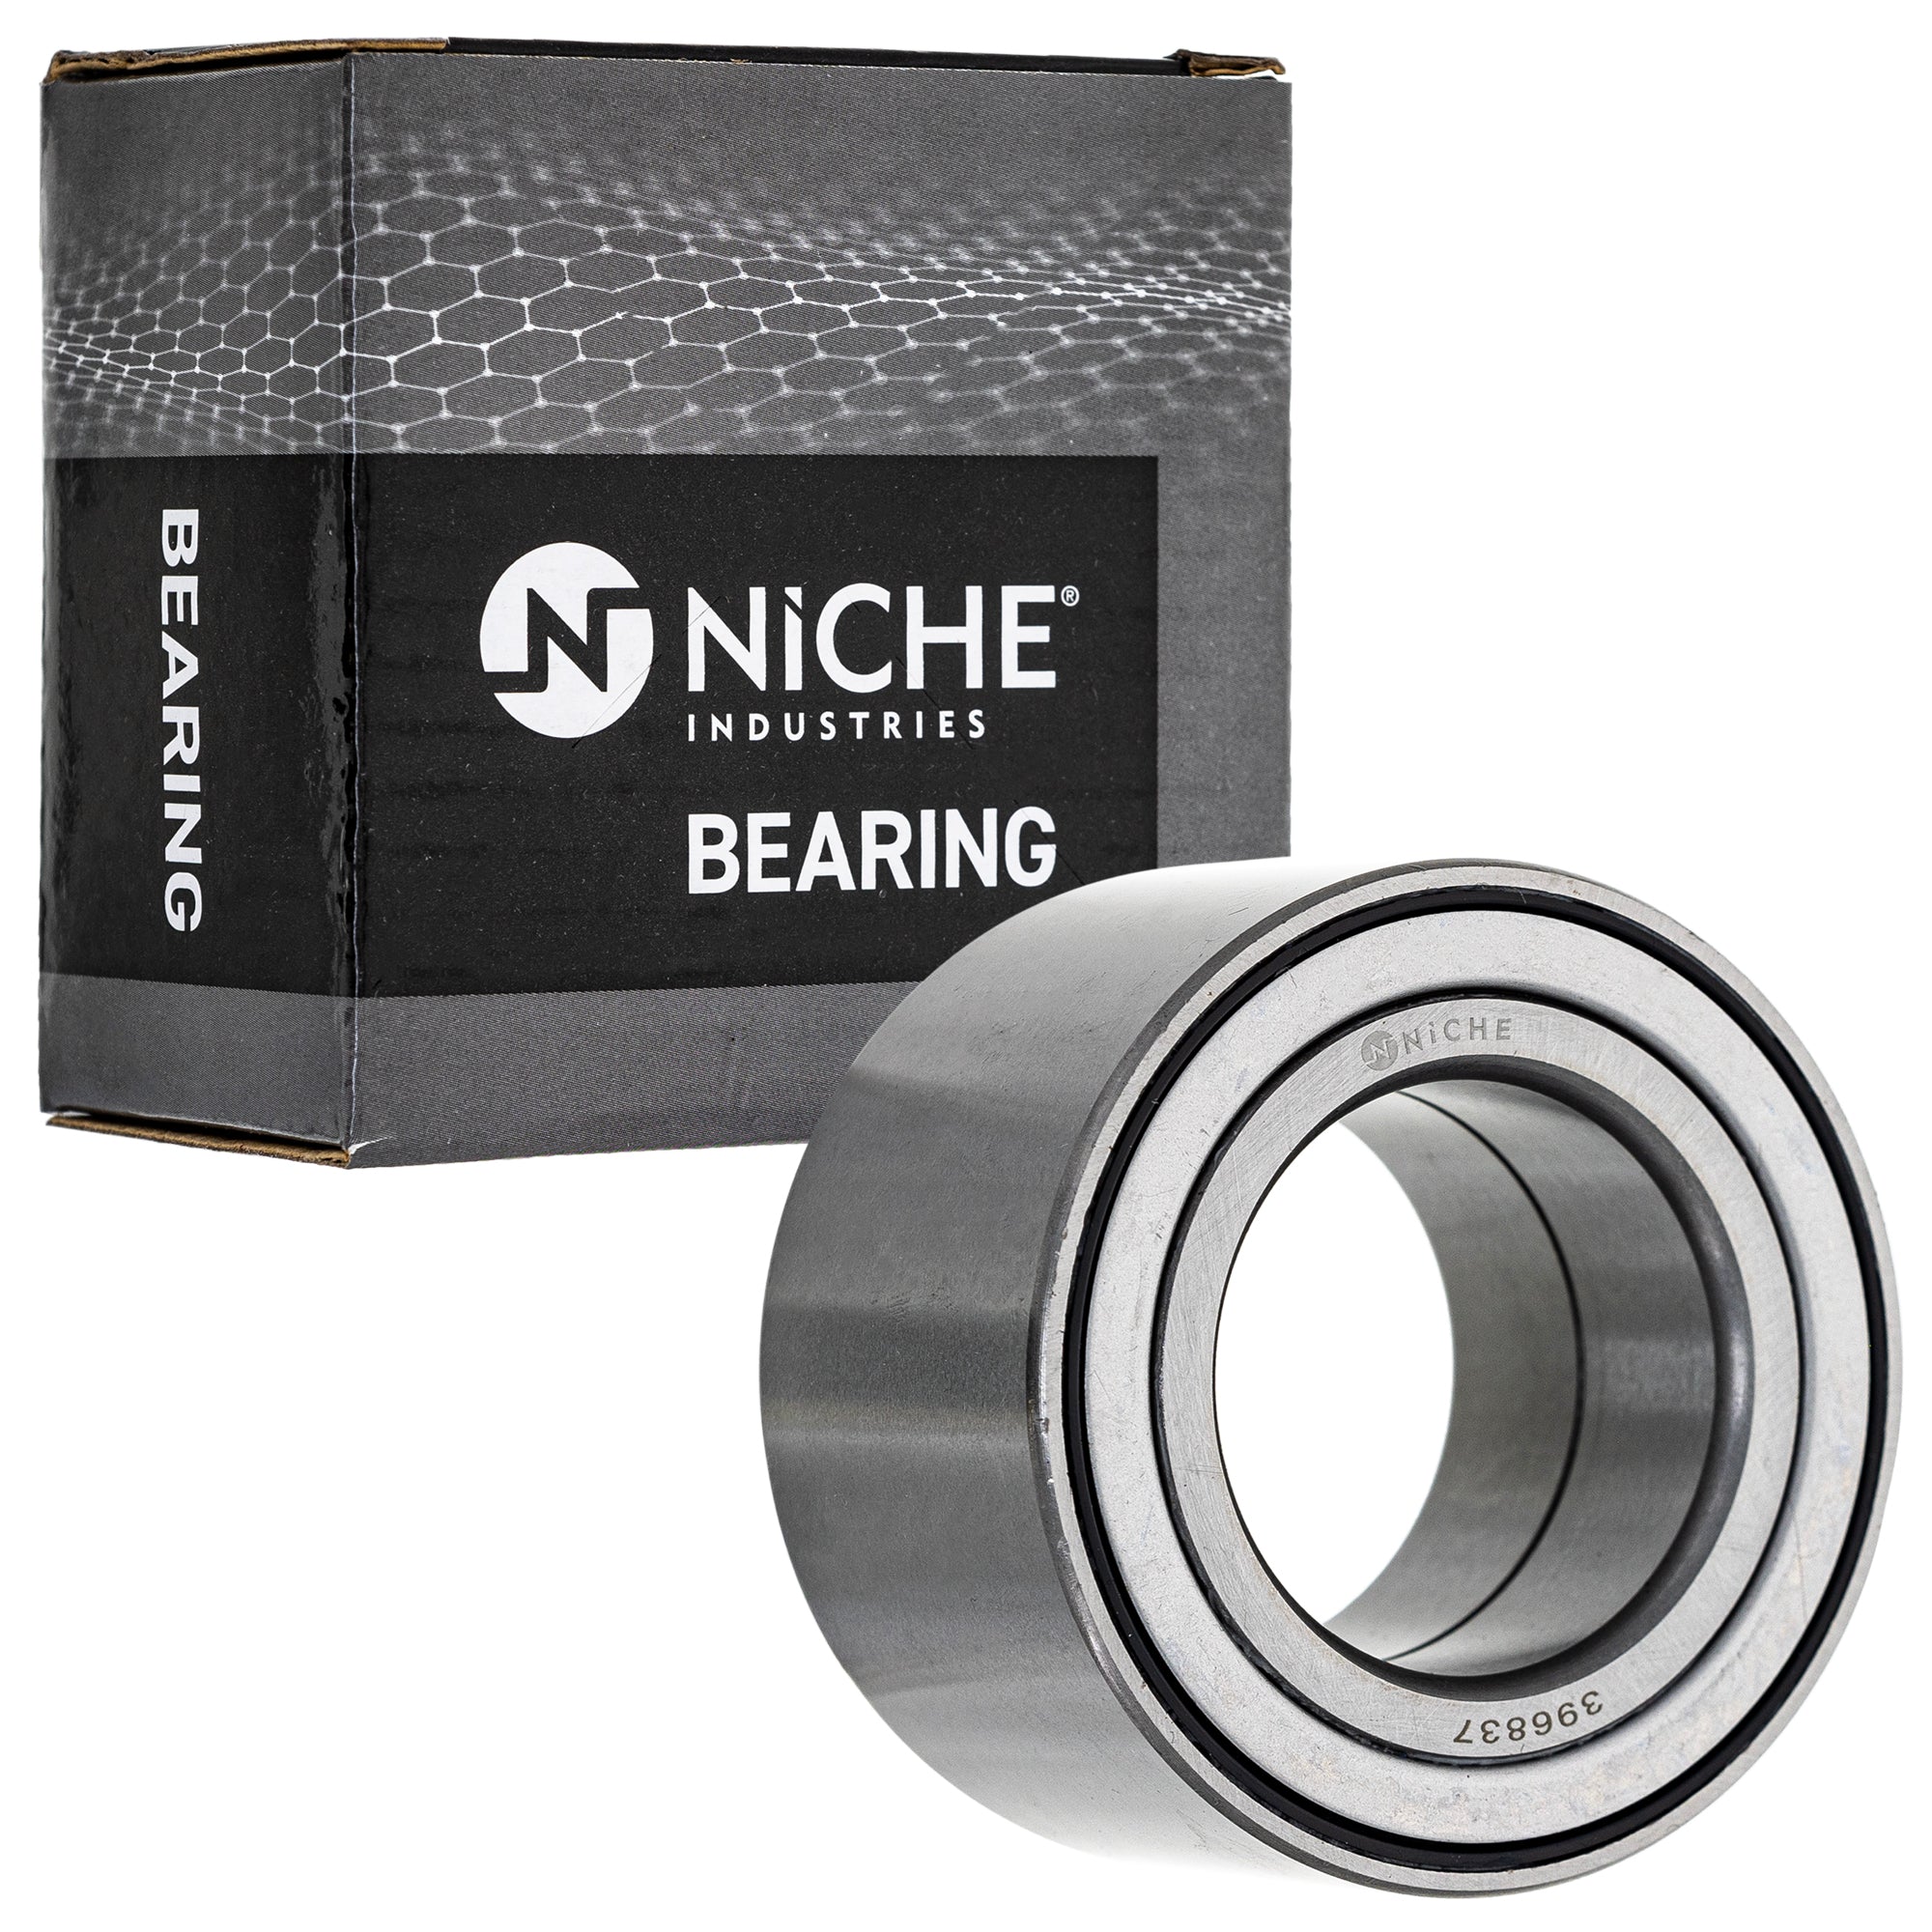 NICHE 519-CBB2204R Bearing 10-Pack for zOTHER